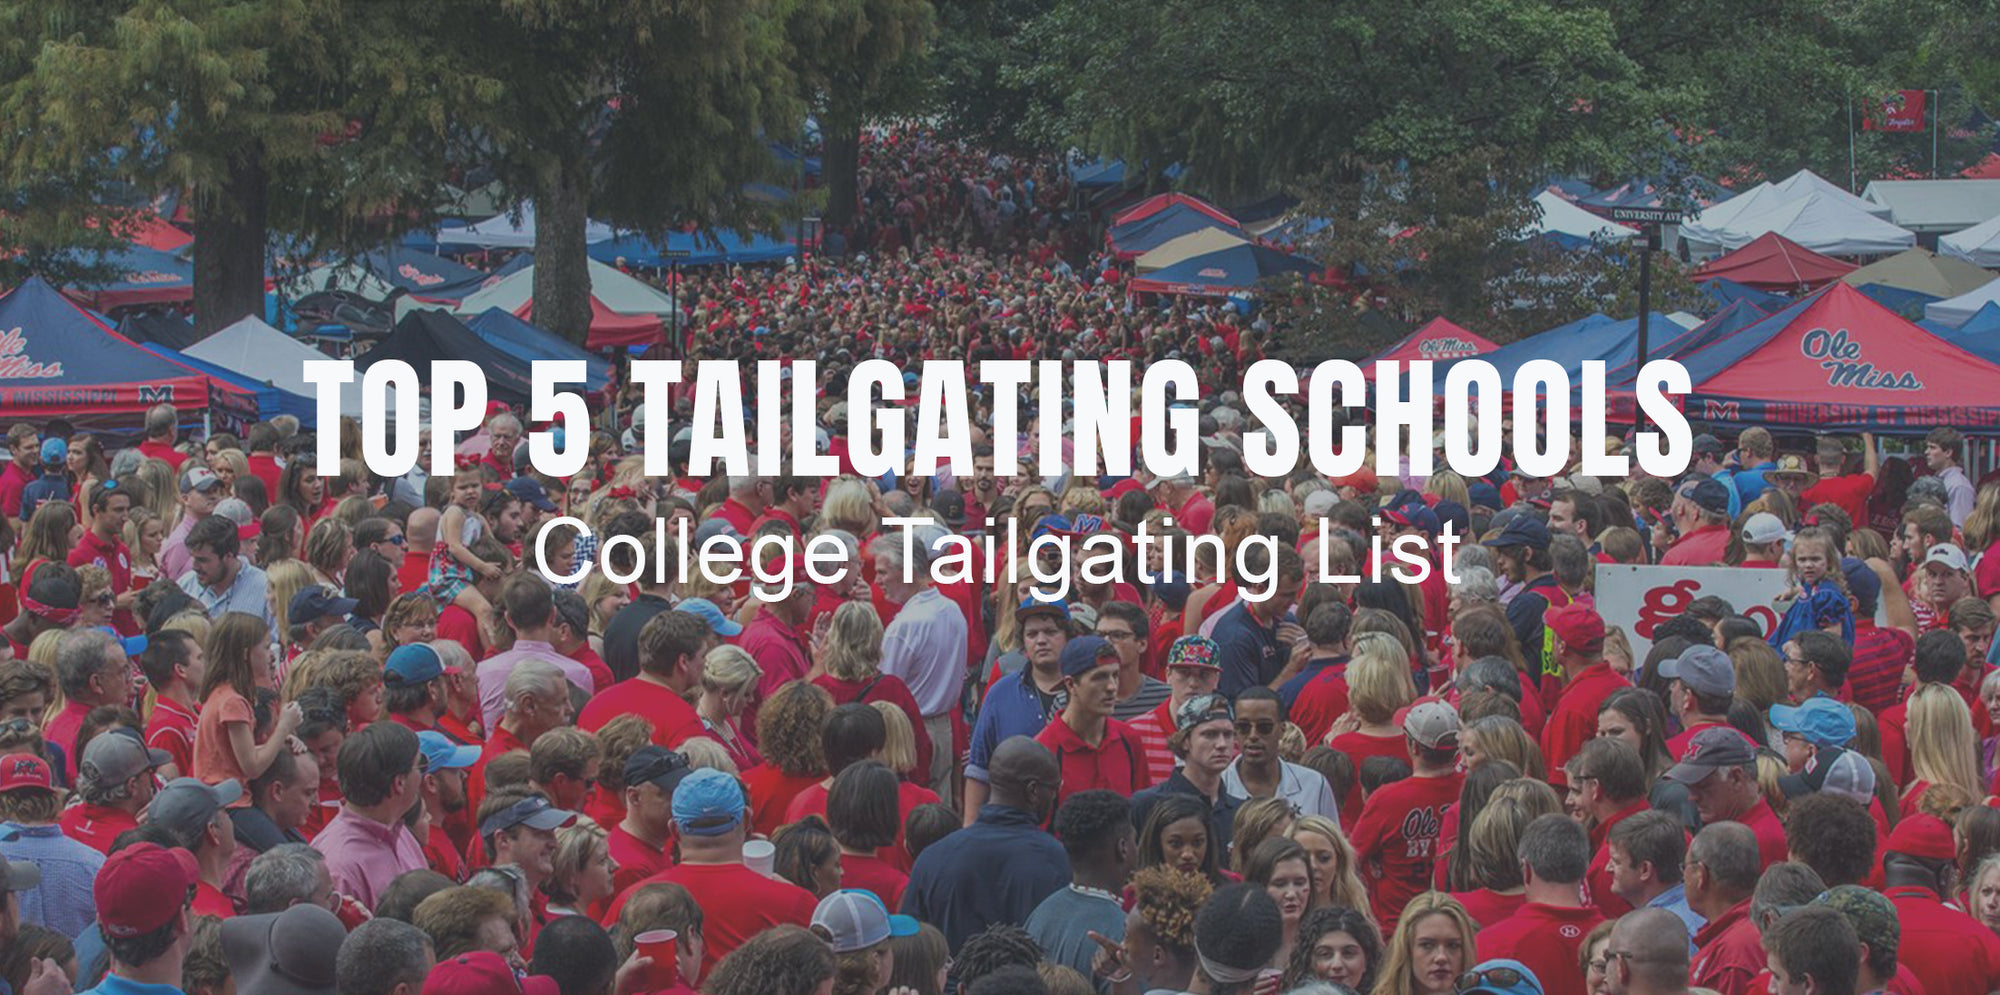 Top 5 College Tailgating Schools